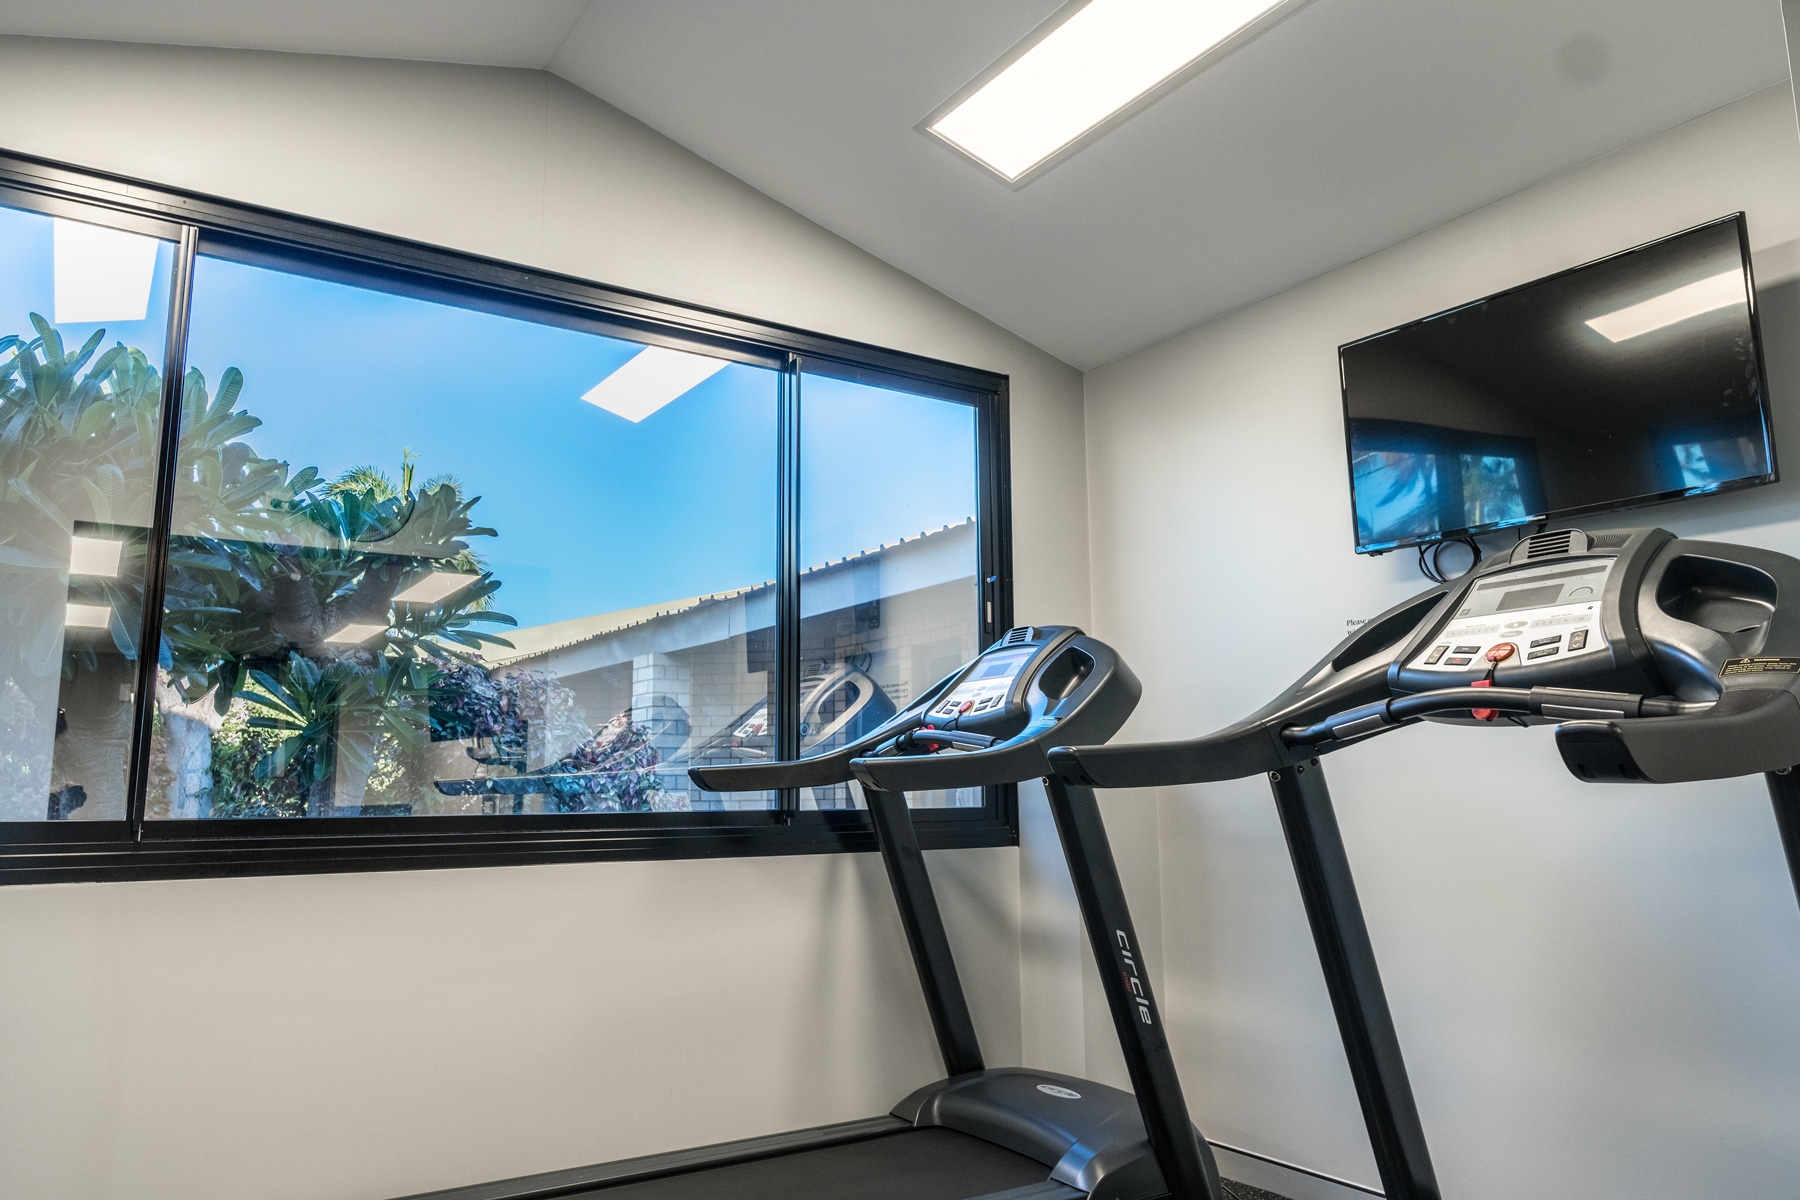 The gym at the Karratha International Hotel features treadmills